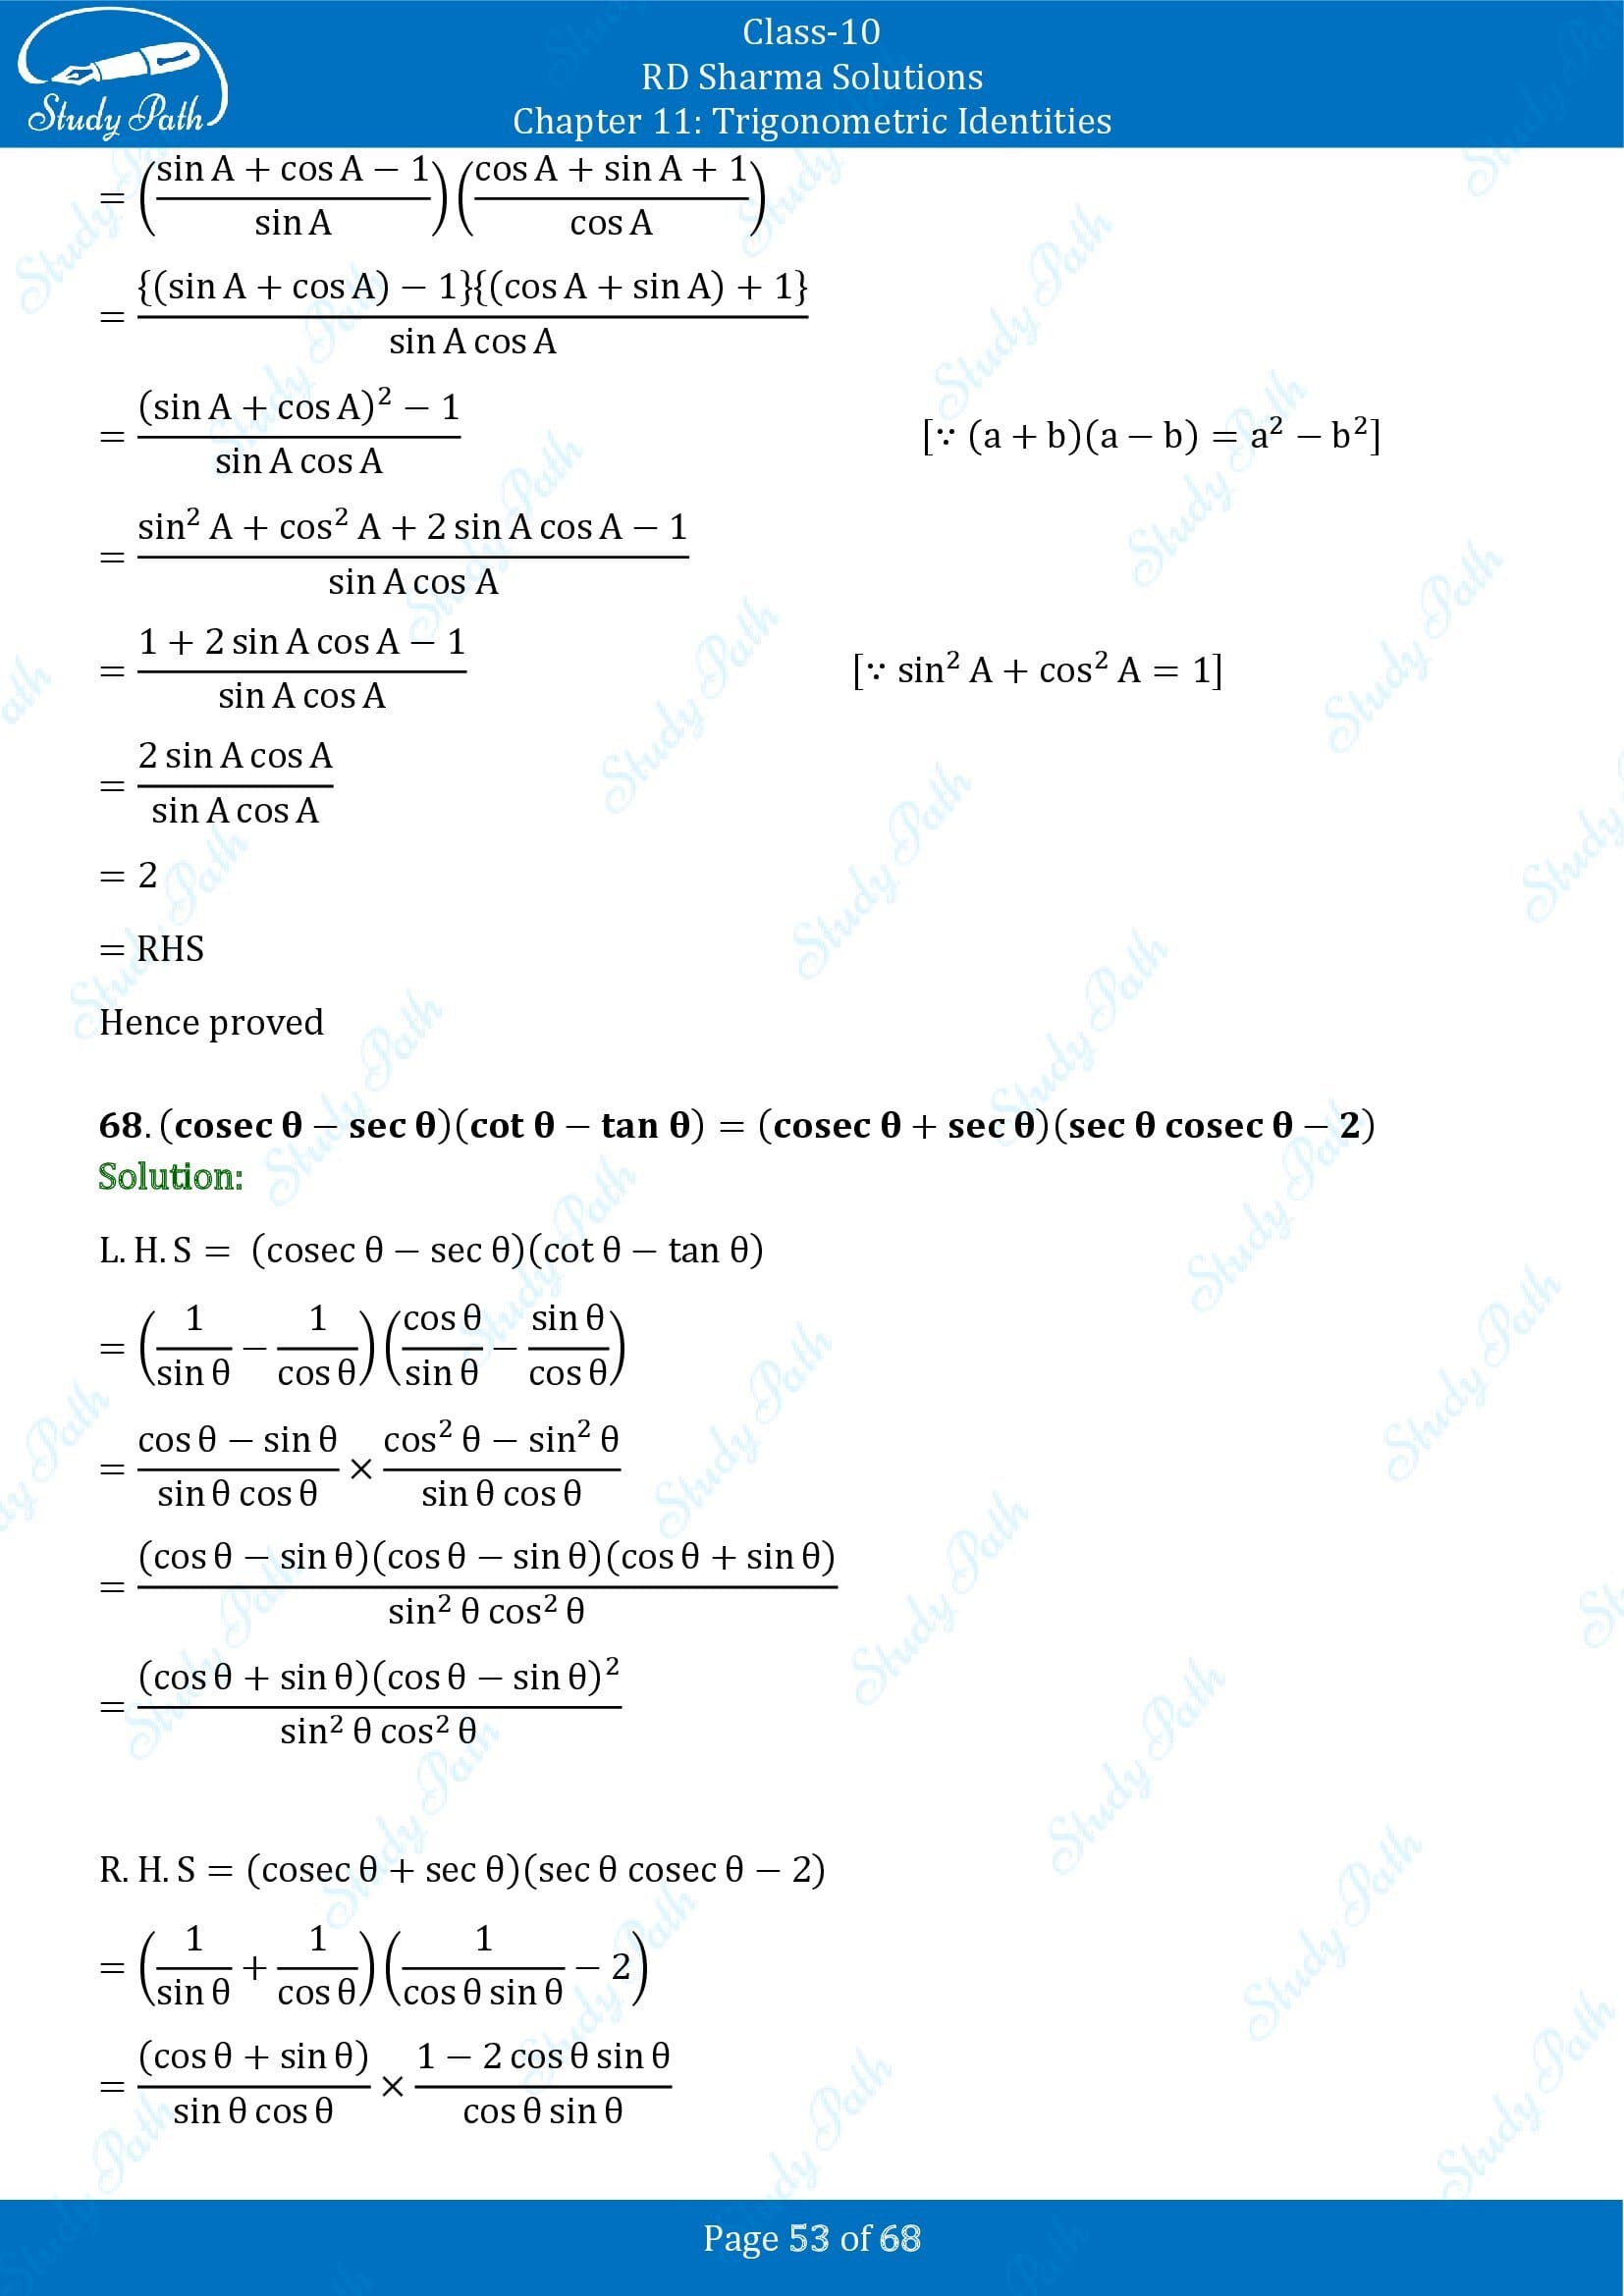 RD Sharma Solutions Class 10 Chapter 11 Trigonometric Identities Exercise 11.1 00053